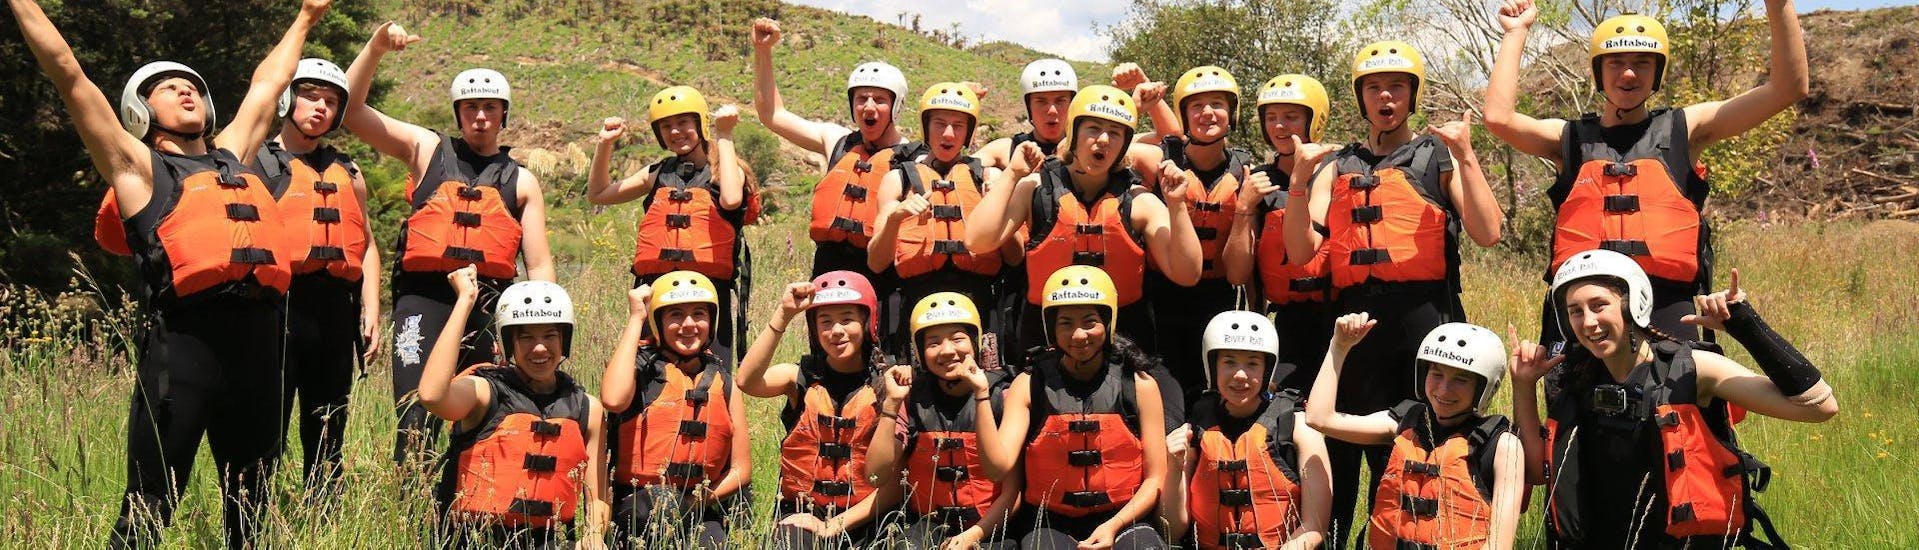 A group of rafters prepares for the rotorua rafting waterfall experience winter tour with  River Rats Rotorua Raft & Kayak.